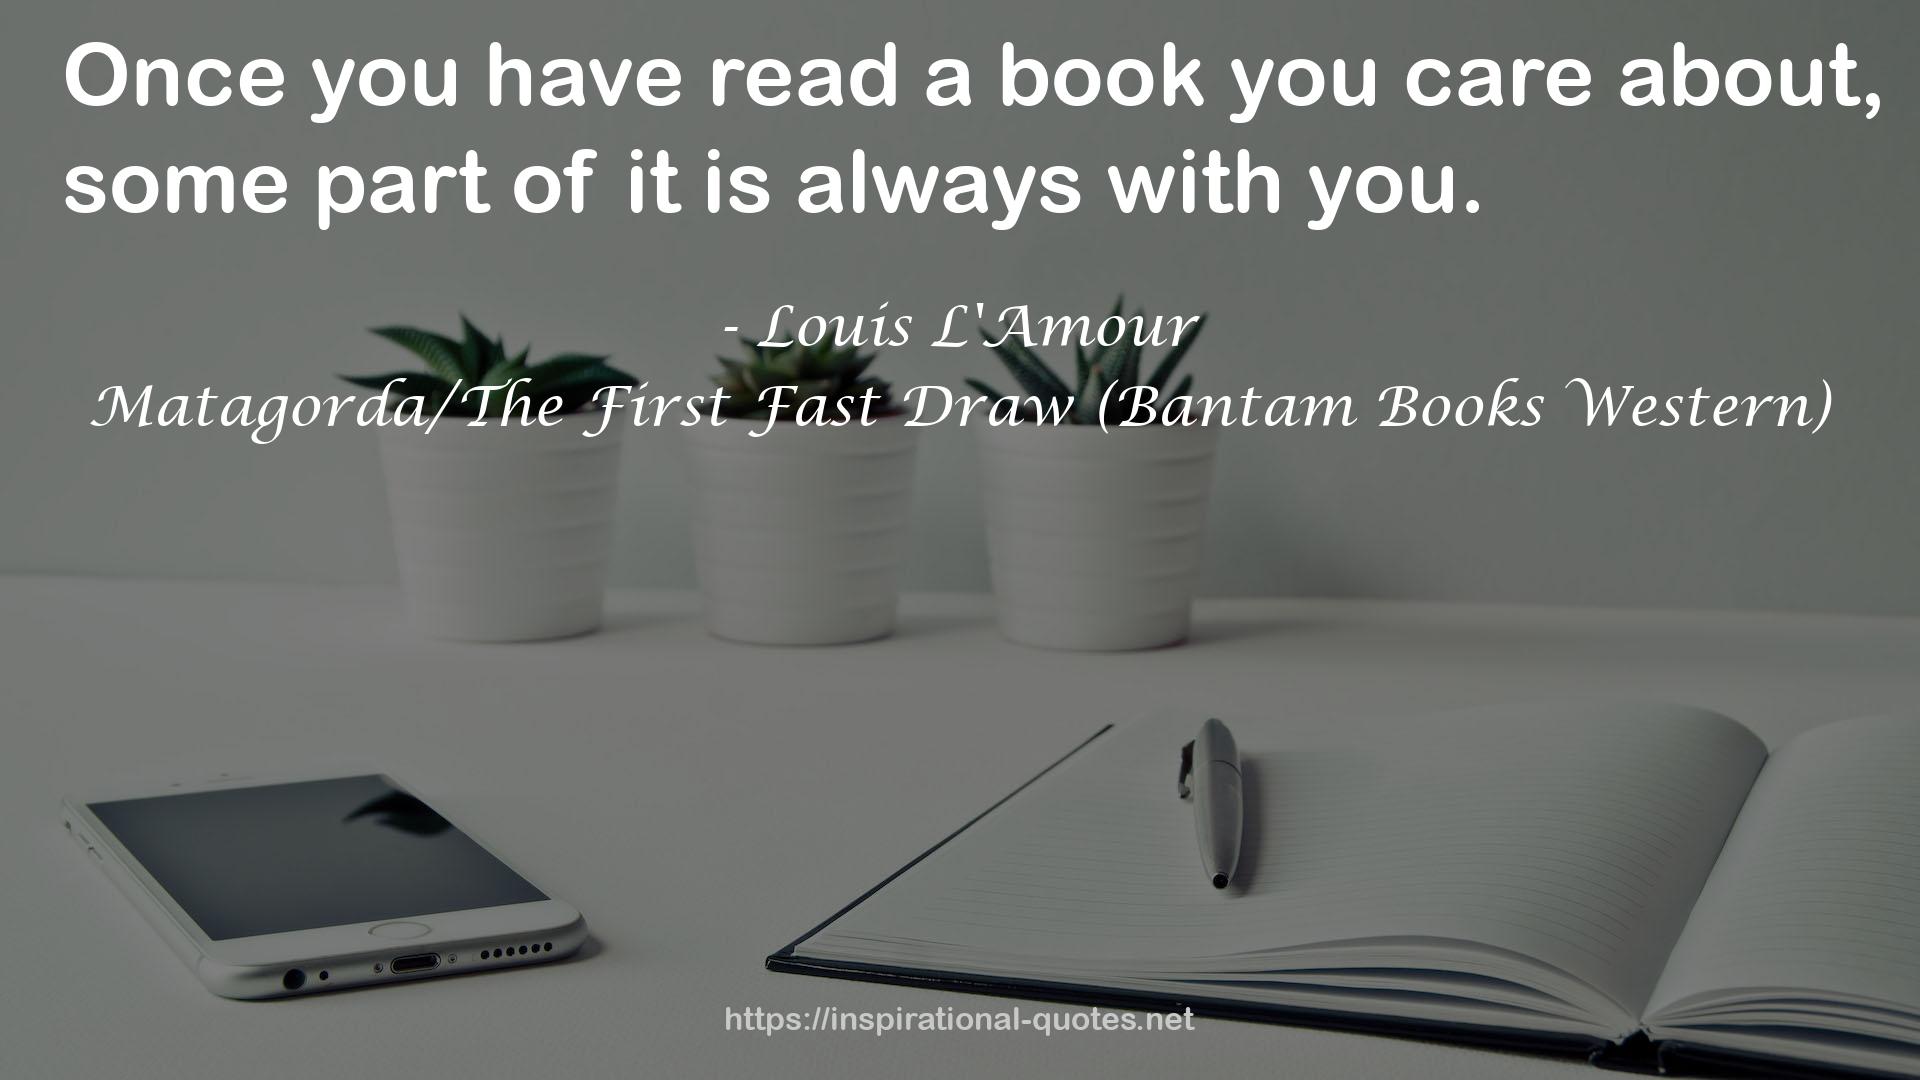 Matagorda/The First Fast Draw (Bantam Books Western) QUOTES